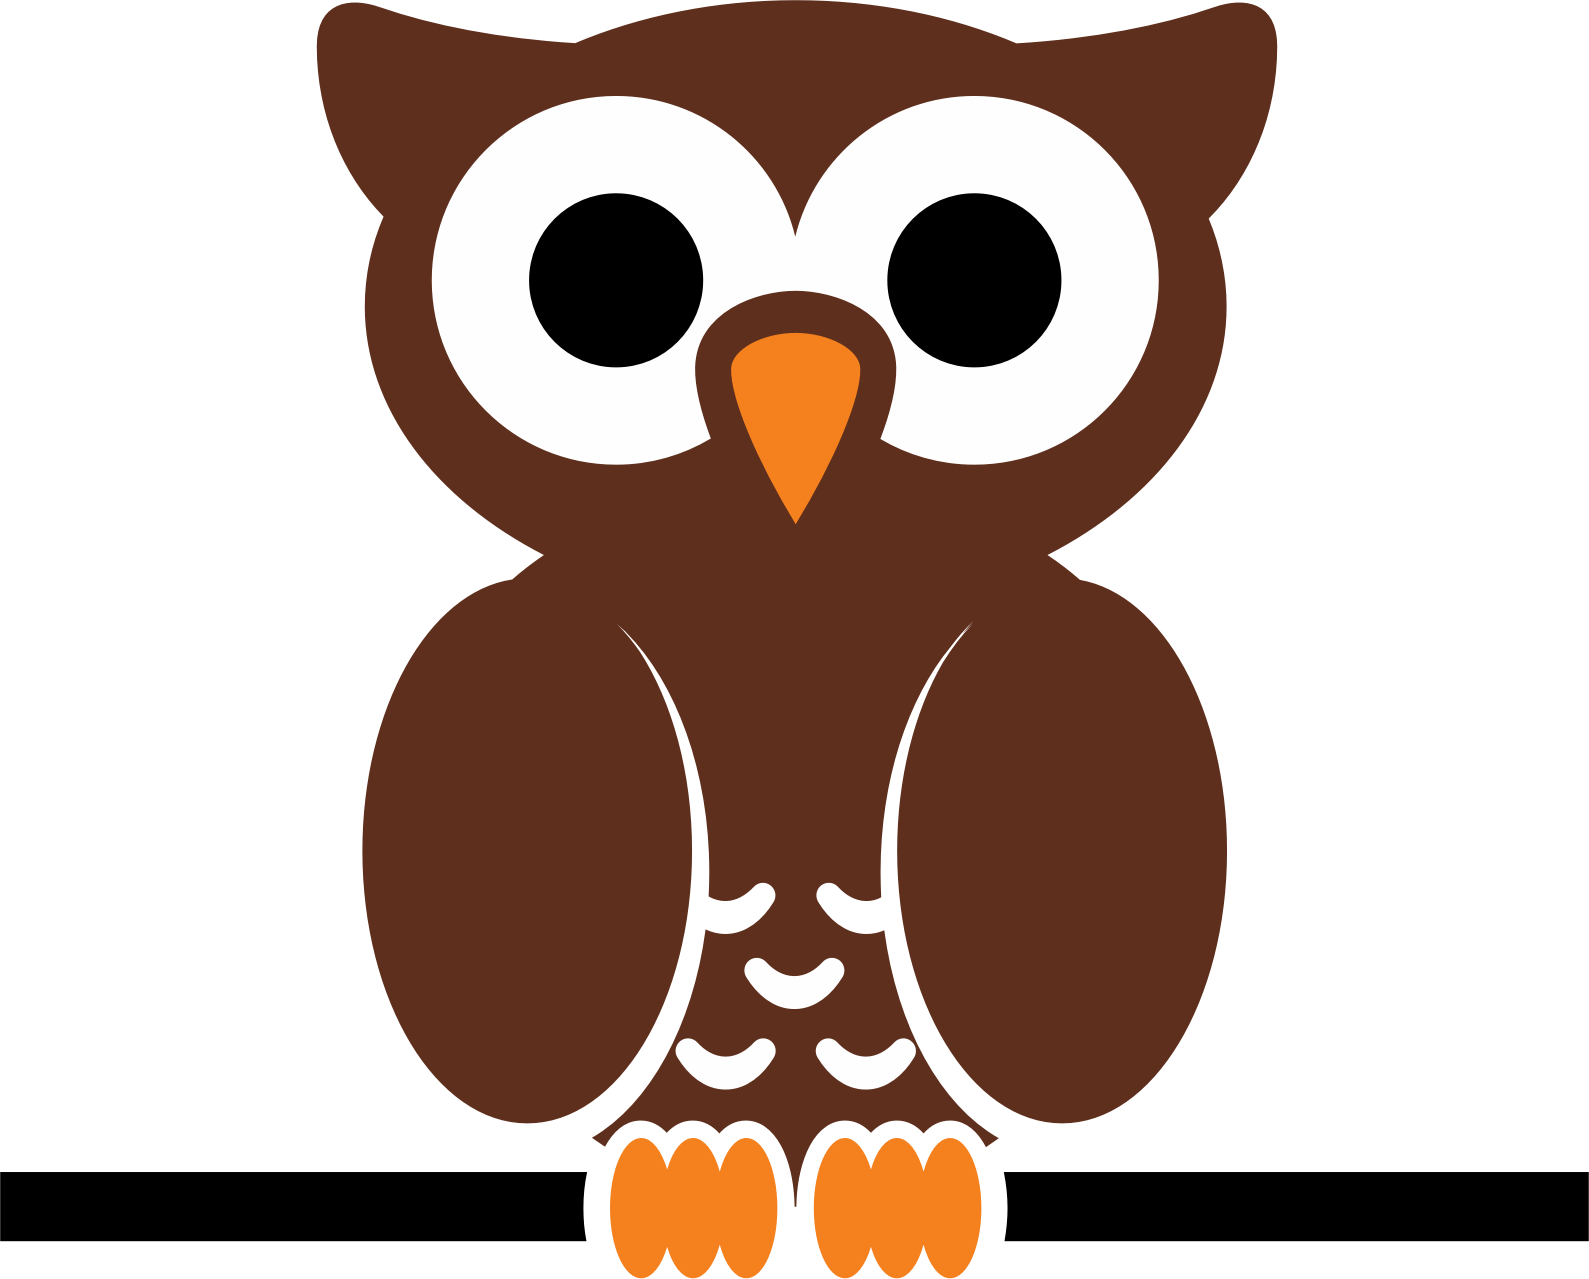 Owl clipart simple, Owl simple Transparent FREE for download